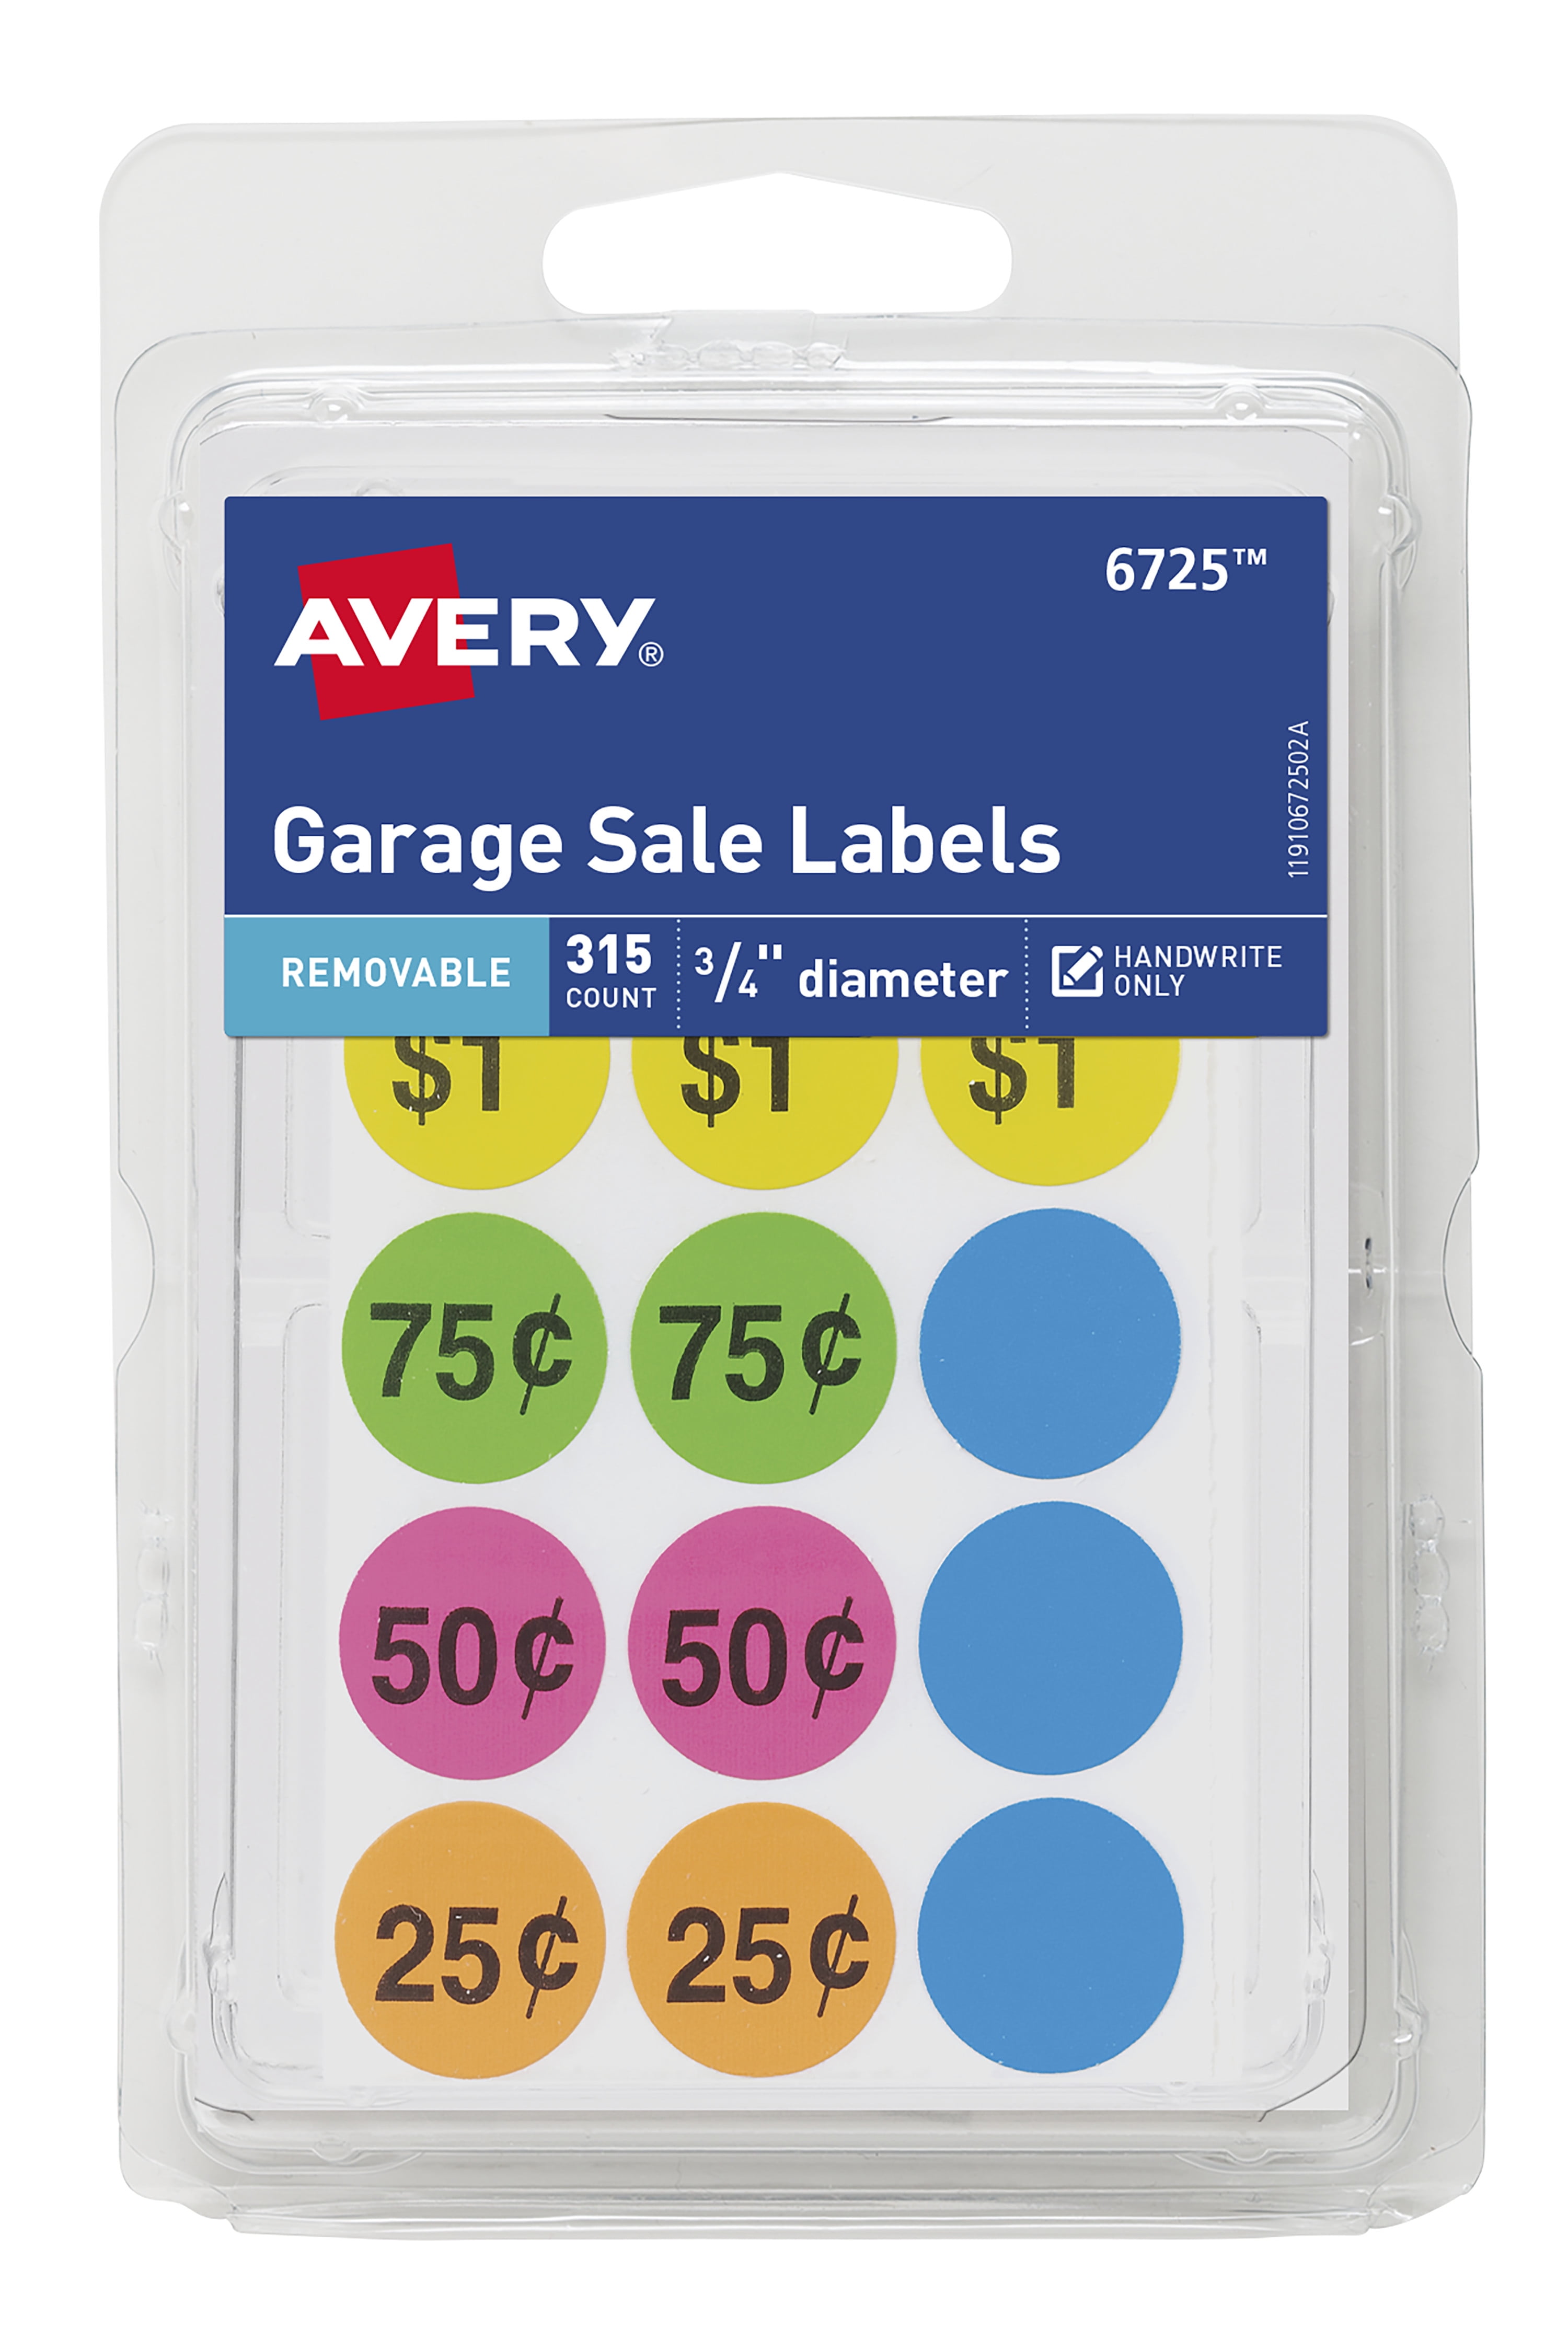 Multi-Colored 3/4 Round Preprinted Pricing Labels Price Stickers Anronal 2520 Count Garage Sale Pricing Stickers Removable Yard Sale Labels with Prices